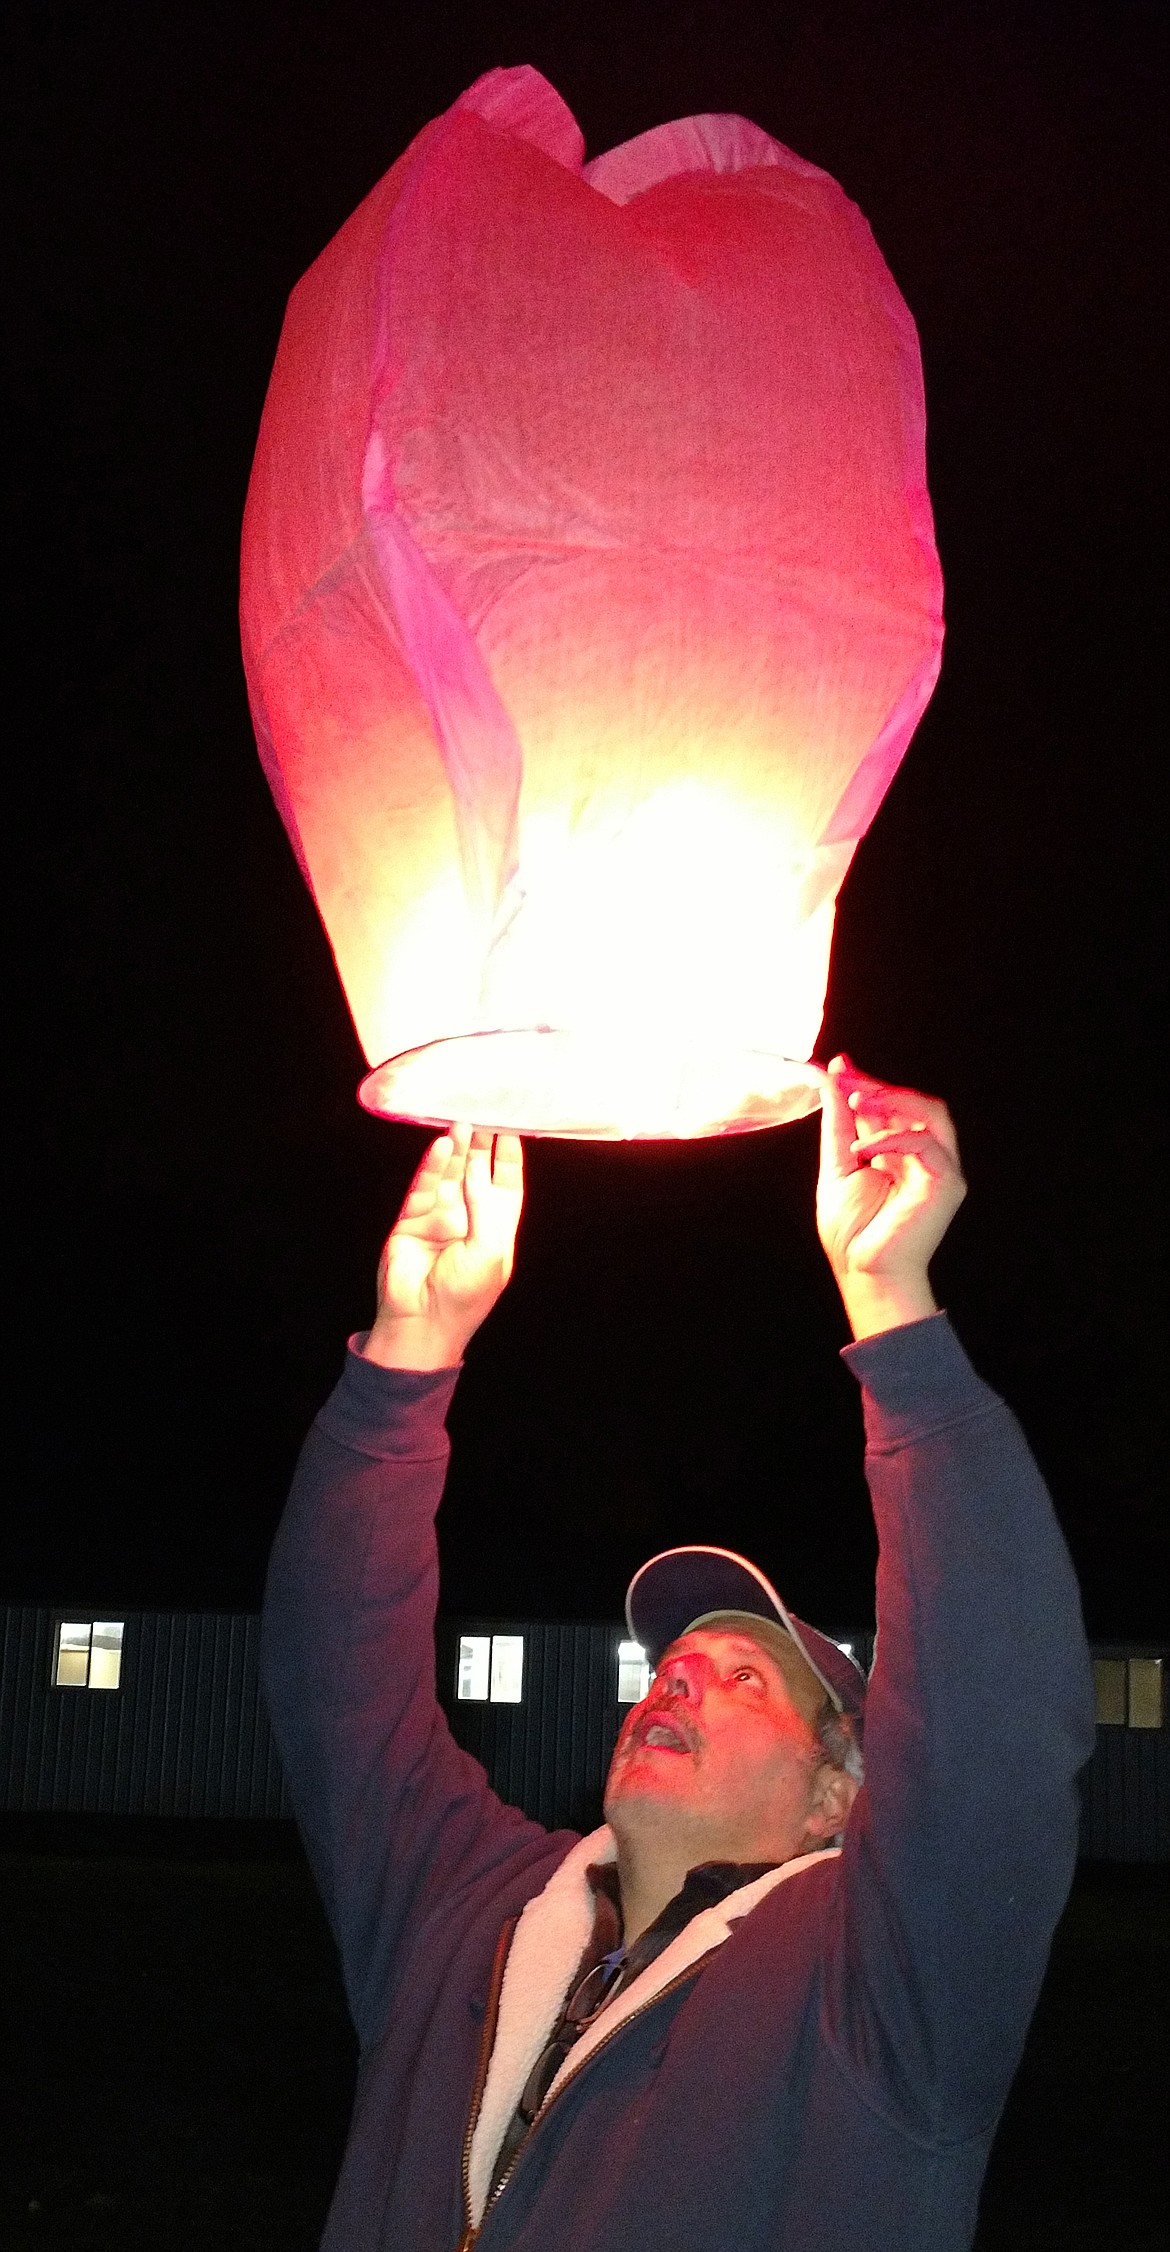 STEVE SEILHYMER carefully sends a luminary skyward during the Cancer Network of Sanders County Lantern Launch on Saturday, Oct. 20 outside the ag building at the Sanders County Fairgrounds. CNSC assists people afflicted with cancer who need help to get to medical appointments by providing funds for transportation or travel costs. (Joe Sova/Clark Fork Valley Press)